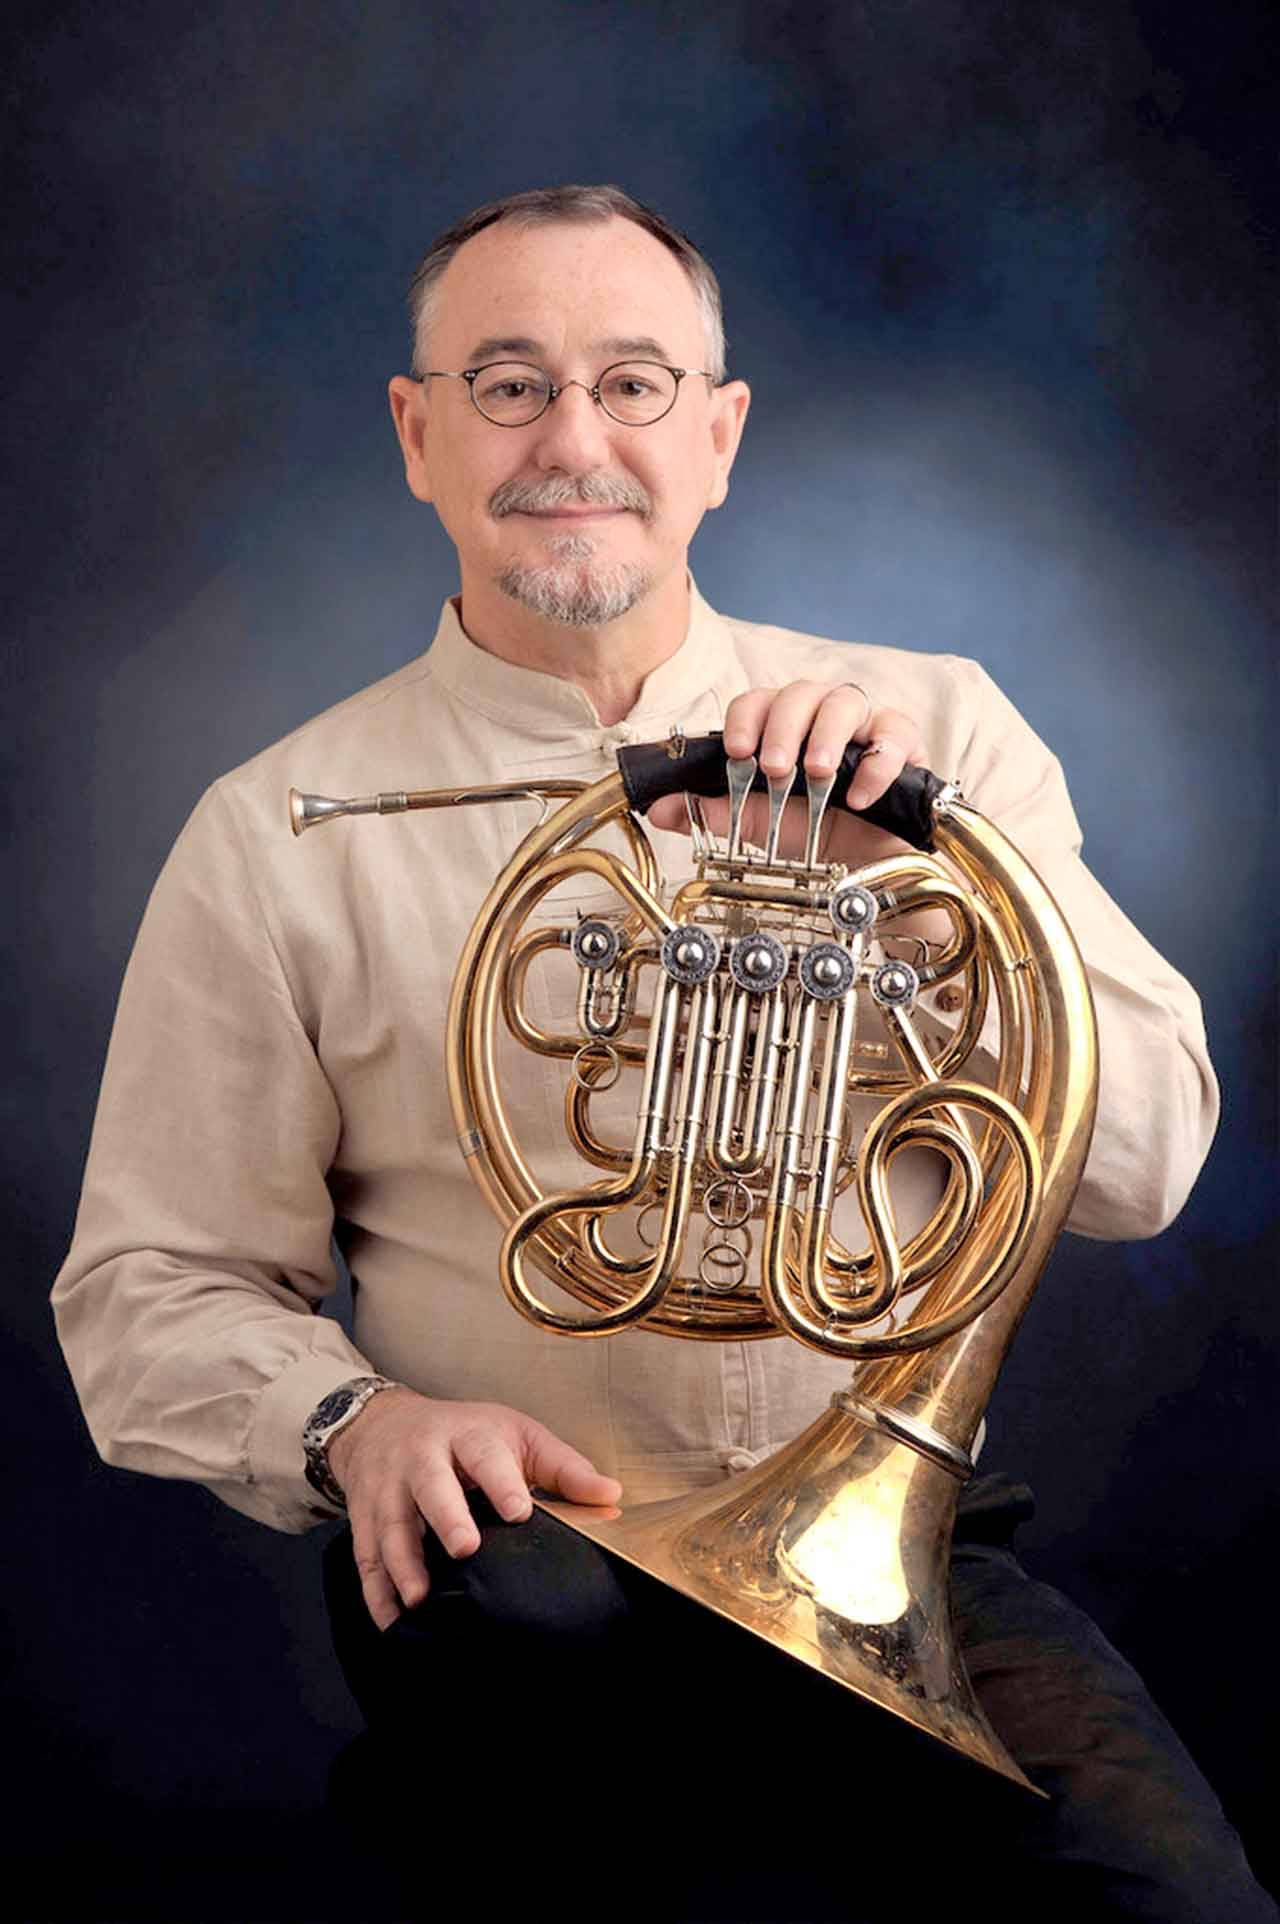 Horn soloist Kerry Turner will perform in the Port Angeles Chamber Orchestra’s season opening concerts Friday and Saturday, Oct. 13 and 14. (Kerry Turner)